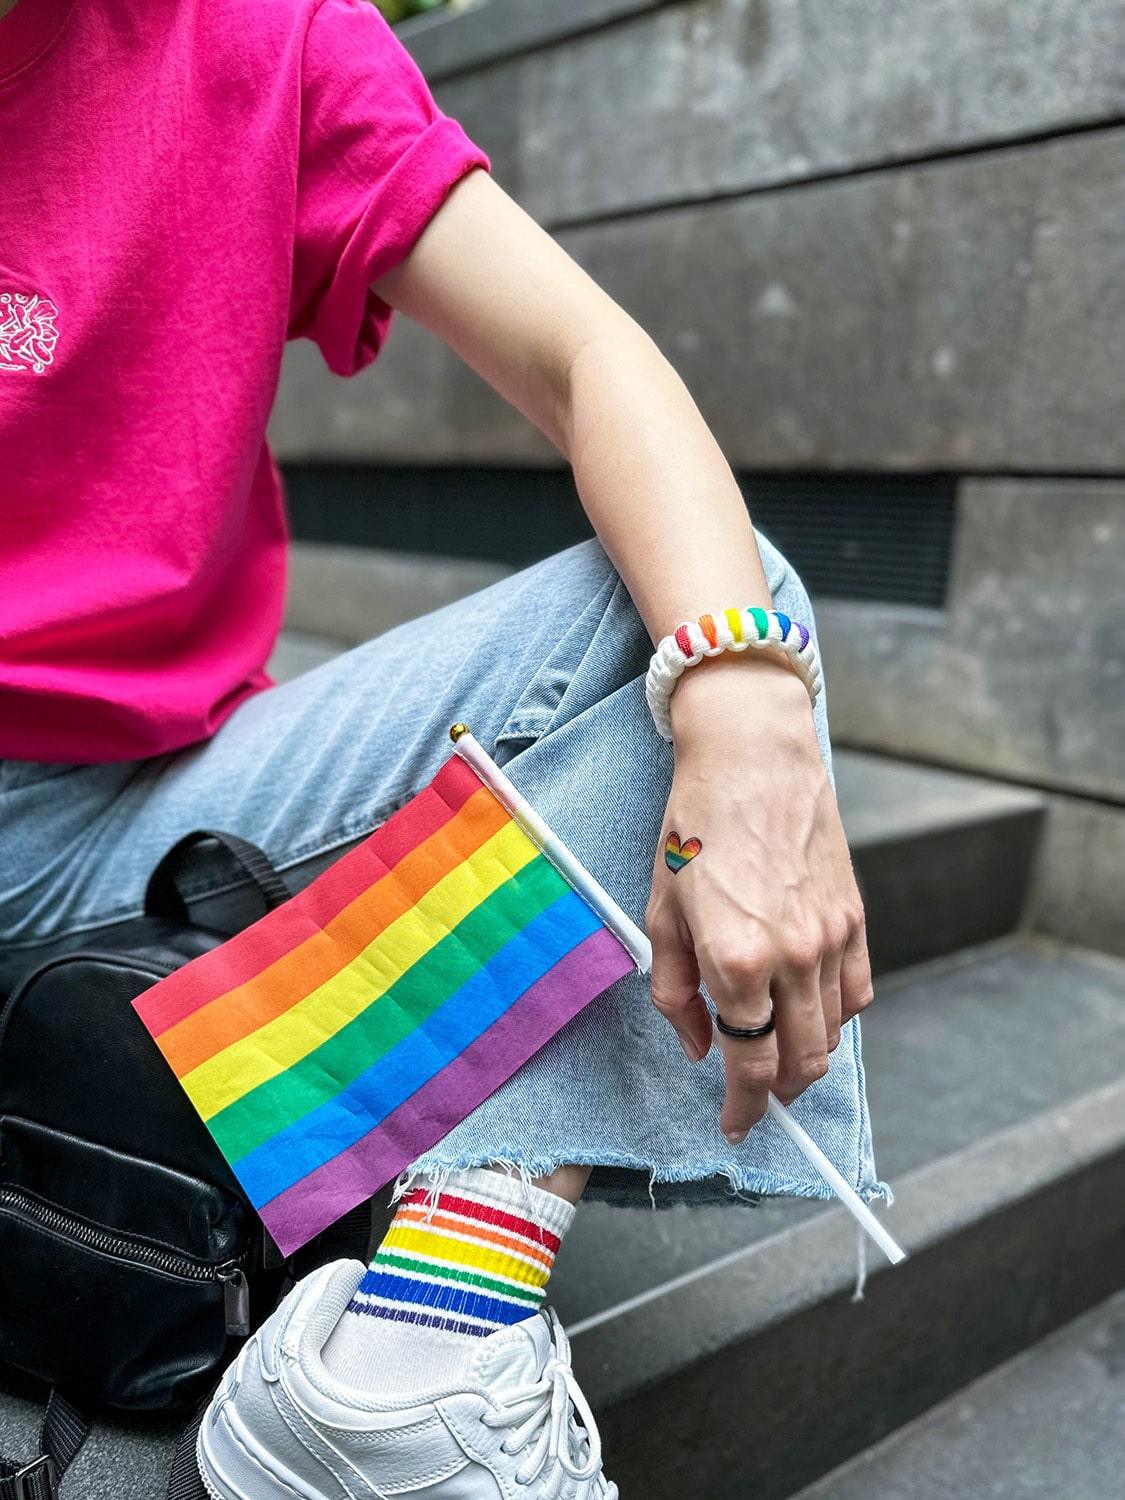 An Asian female with long hair is wearing a hot pink t-shirt adorned with an embroidery design of a classic batik orchid flower on the front, along with various LGBT rainbow pride accessories, bracelet and holding a small pride flag. TOMSCOUT Flourish - LGBT Pride Kits (Singapore)